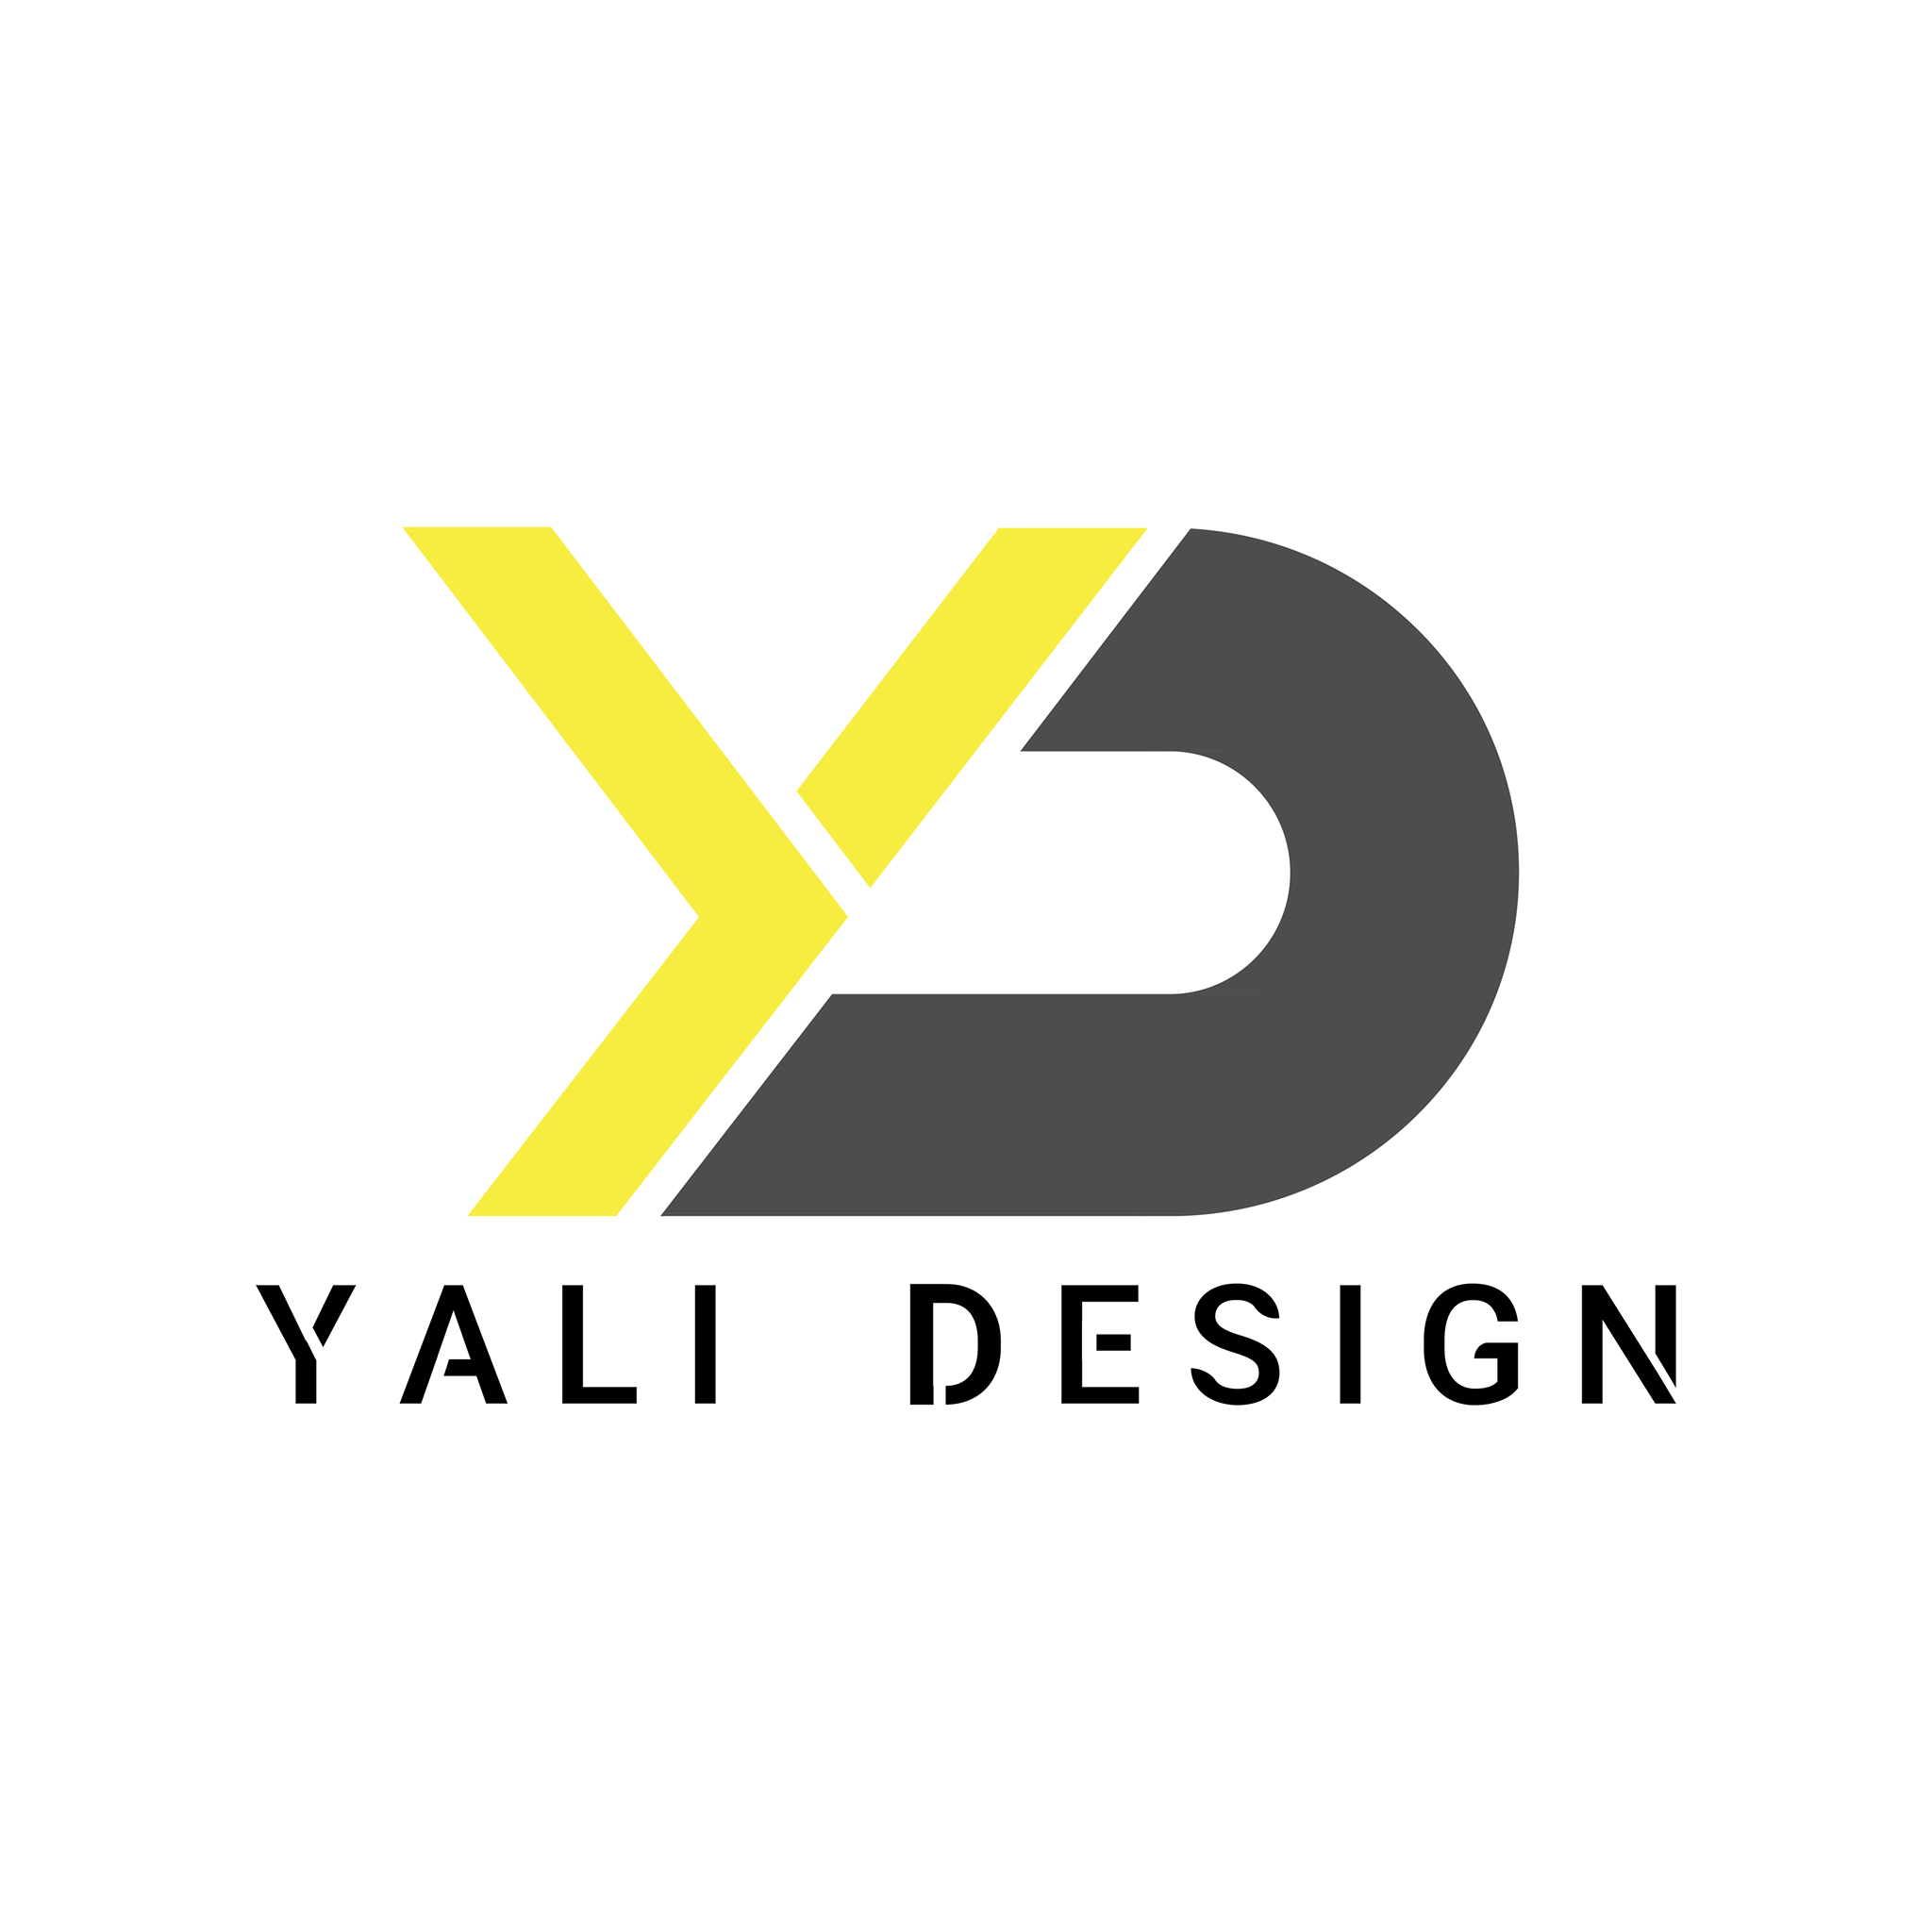 YALI DESIGN & INTERIORS|Accounting Services|Professional Services